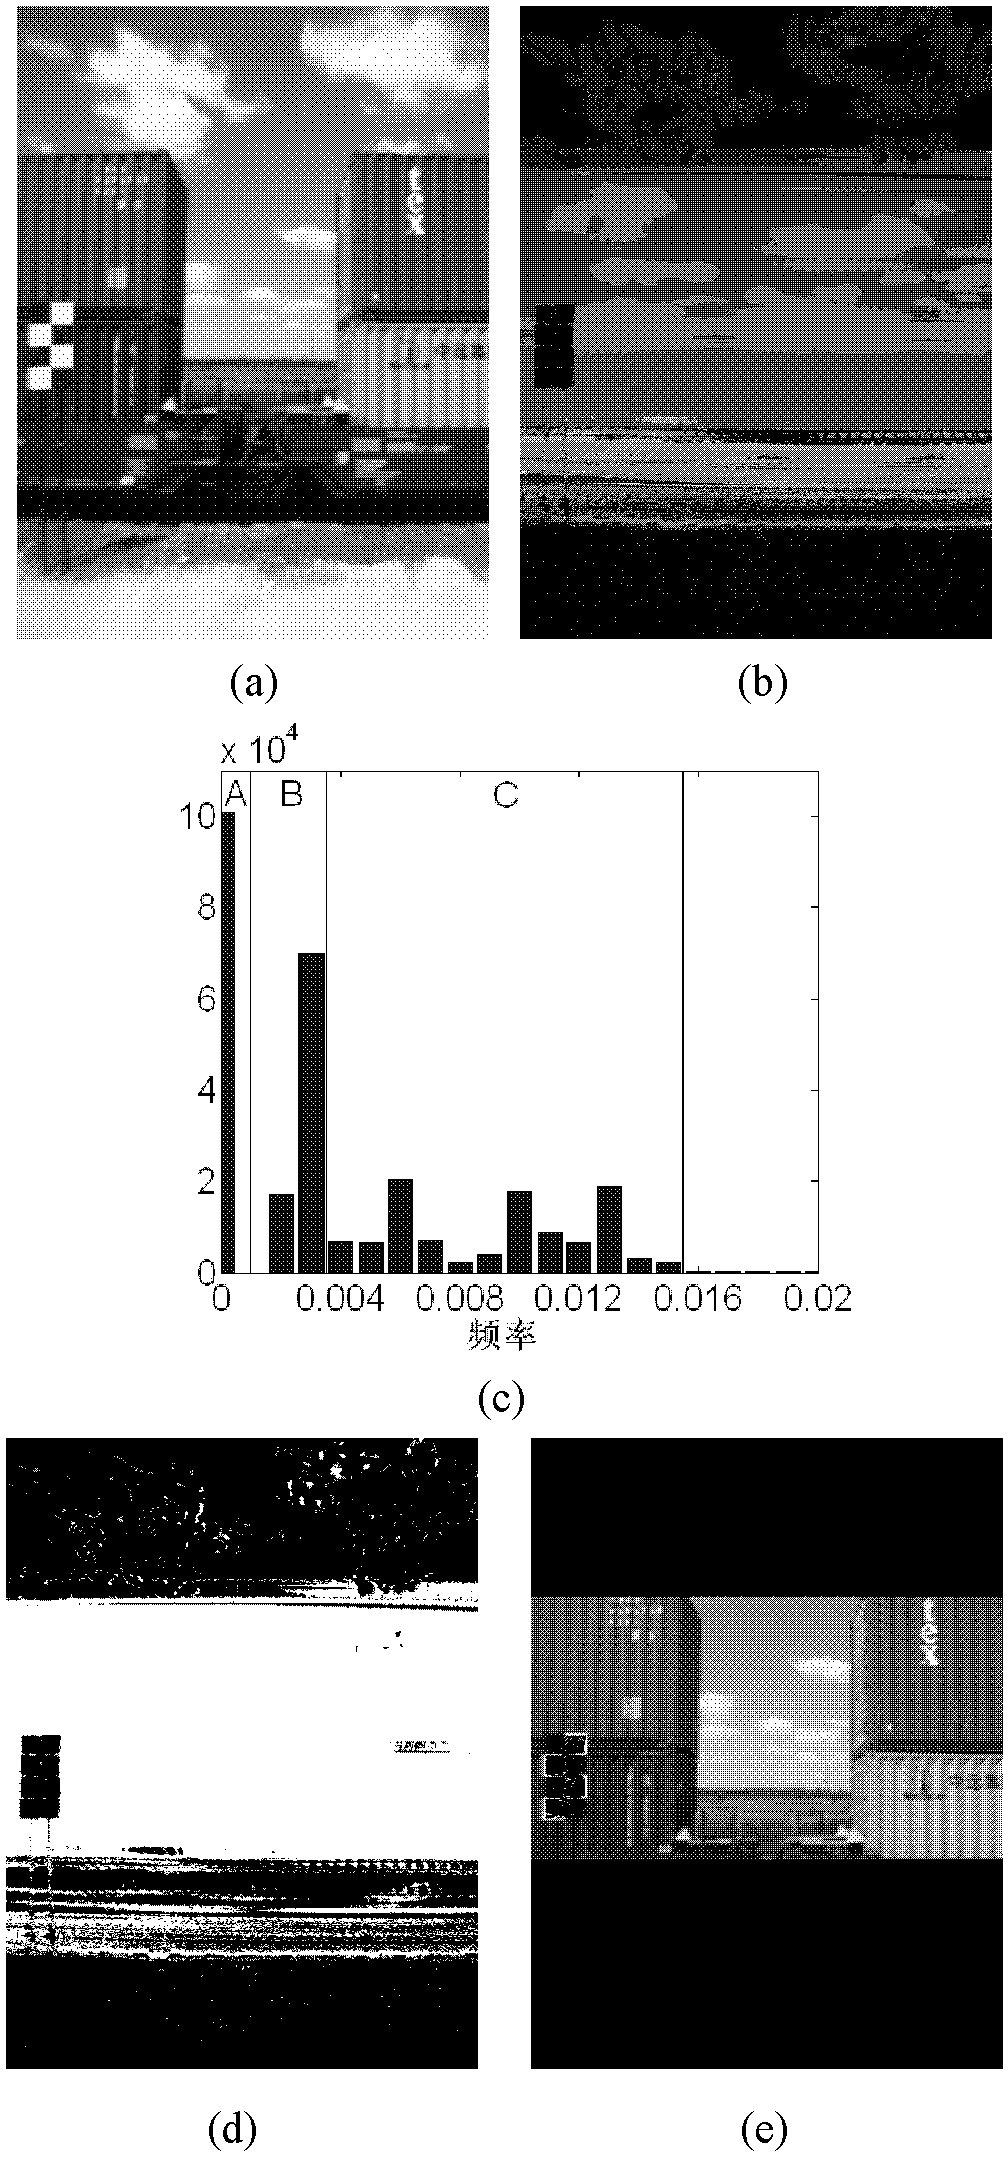 Method for automatically detecting carriage of freight train in video